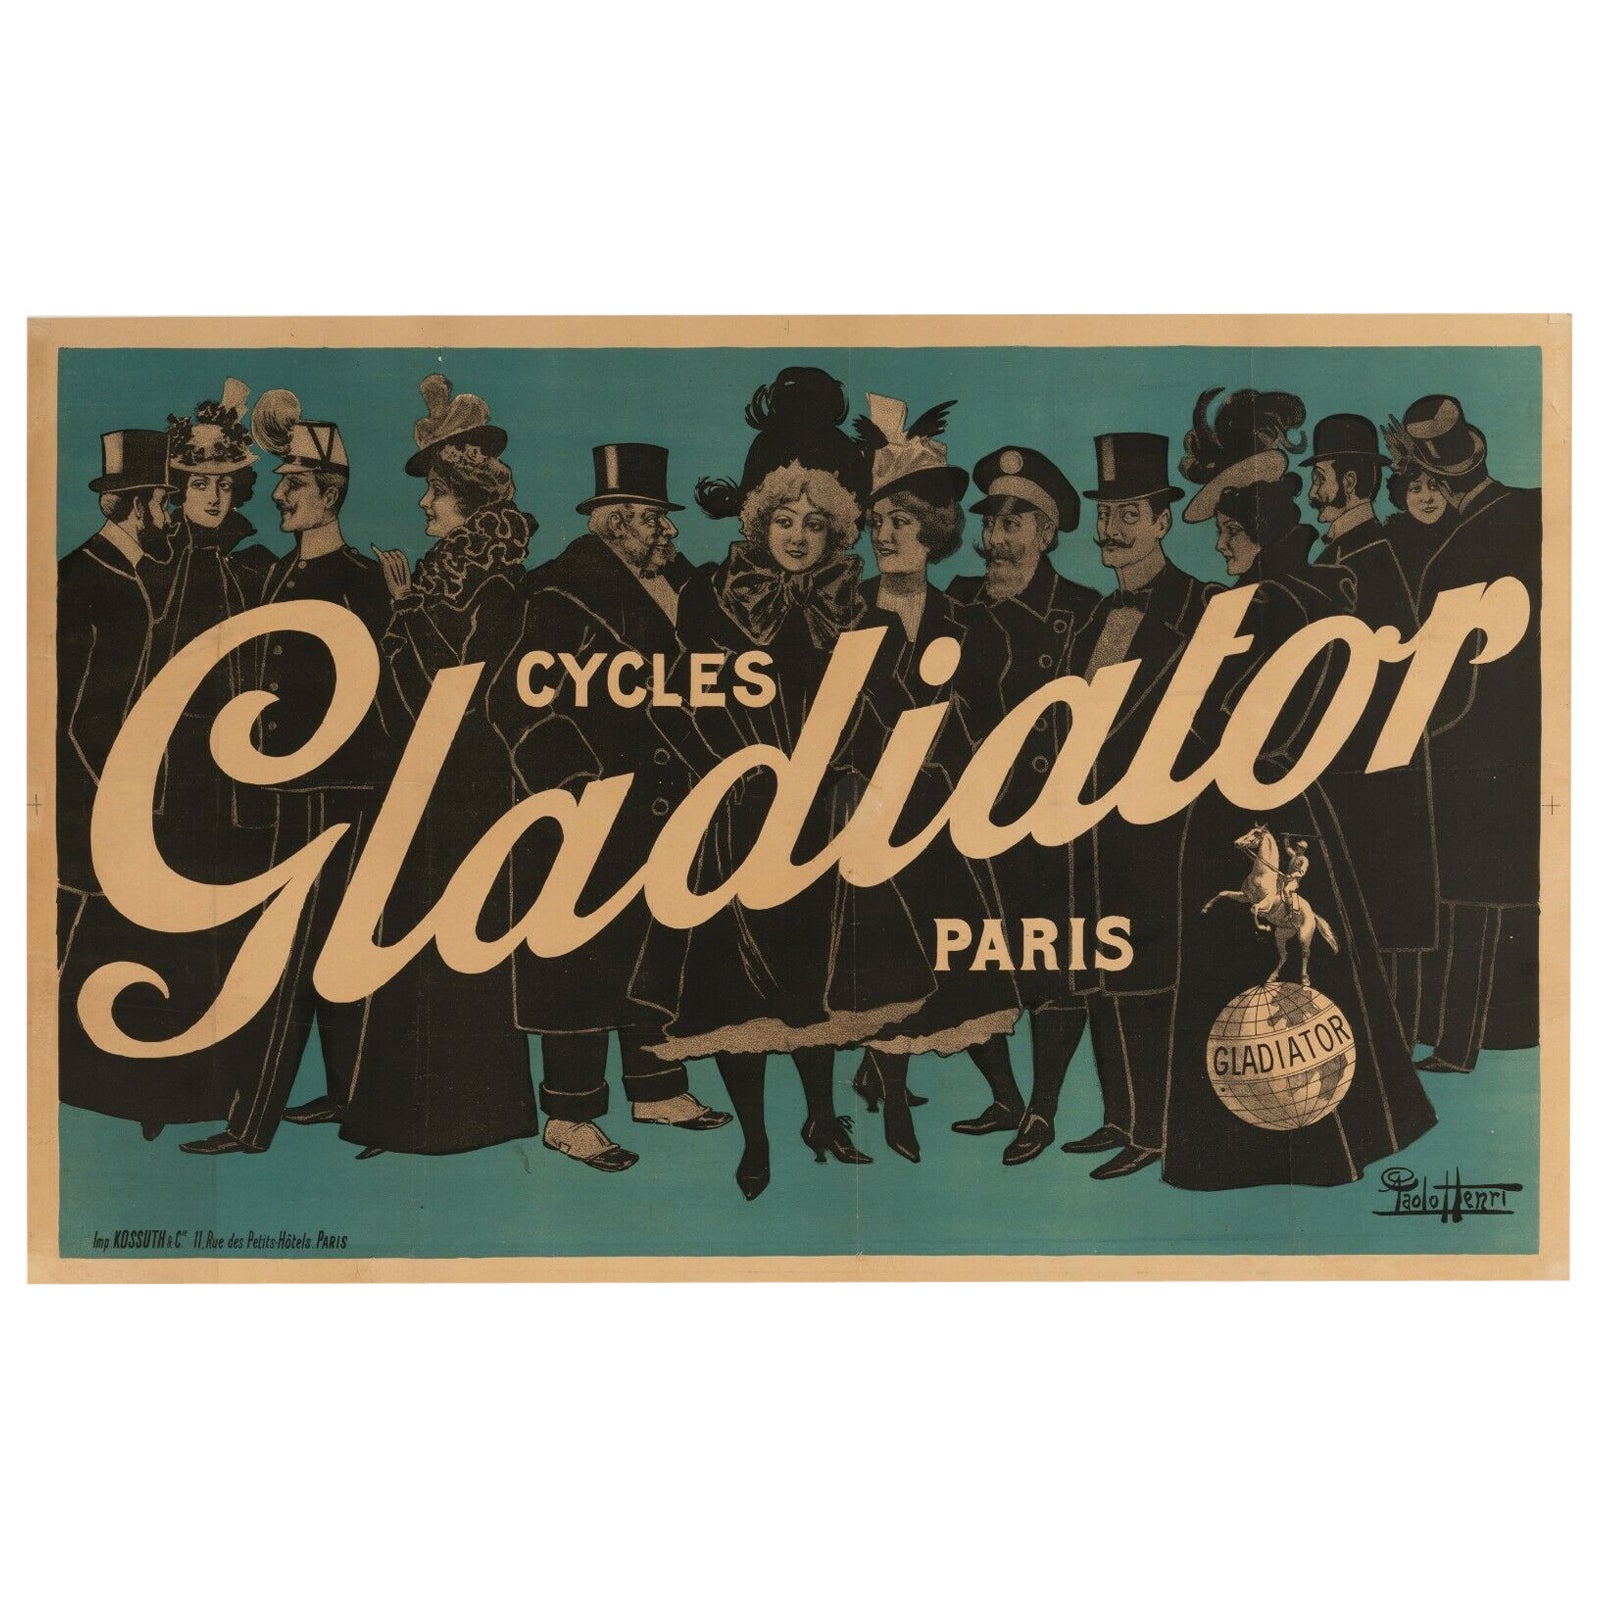 Original Vintage Poster, Paolo Henri, Cycles Gladiator, Paris, Bicycle, 1900 For Sale